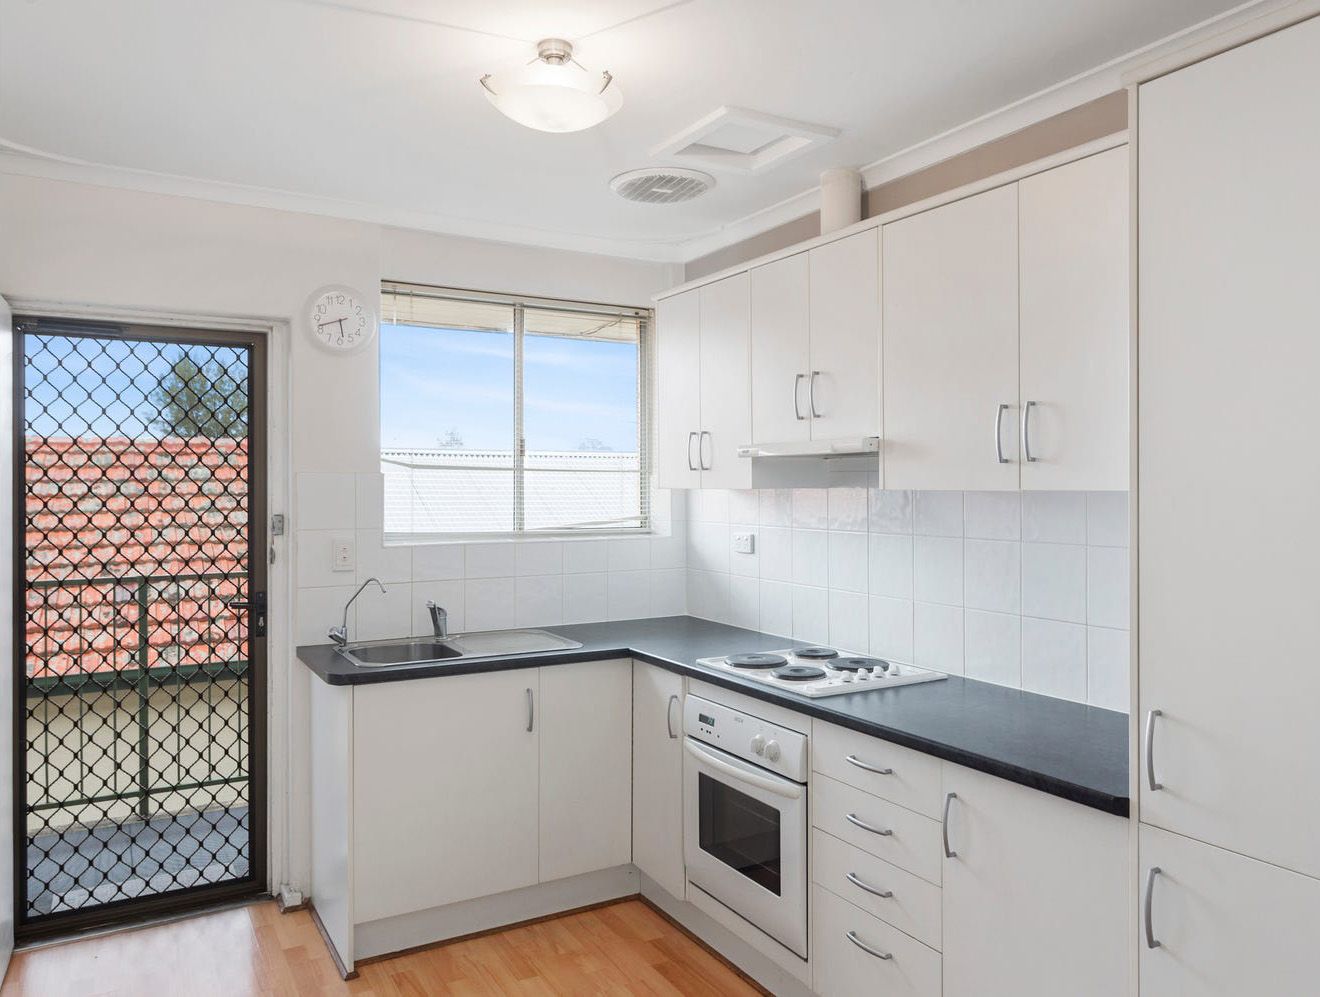 2 bedrooms Apartment / Unit / Flat in 5/33 Angus Avenue EDWARDSTOWN SA, 5039